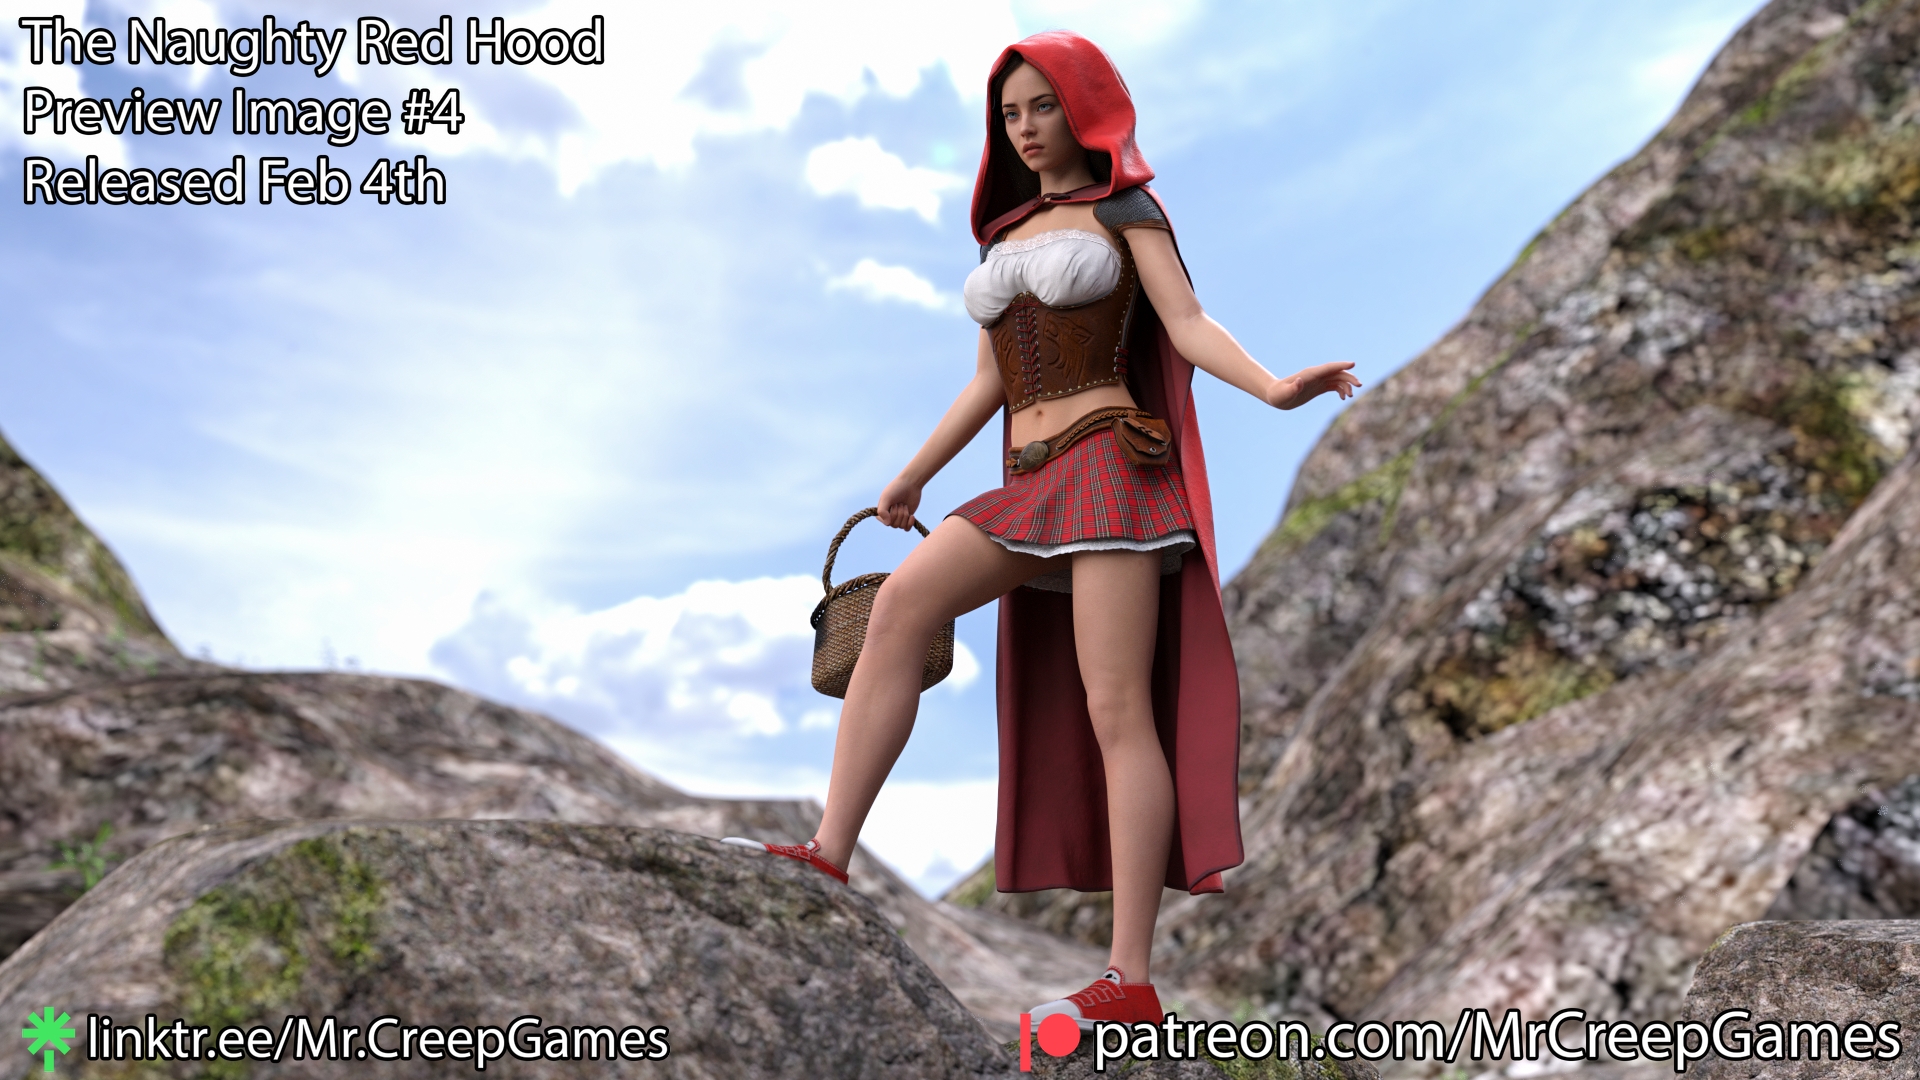 The Naughty Red Hood Preview #4  3d Porn 3d Girl Nsfw 3dnsfw Sexy Hot Nude Big boobs Pinup Pose Cute Teen